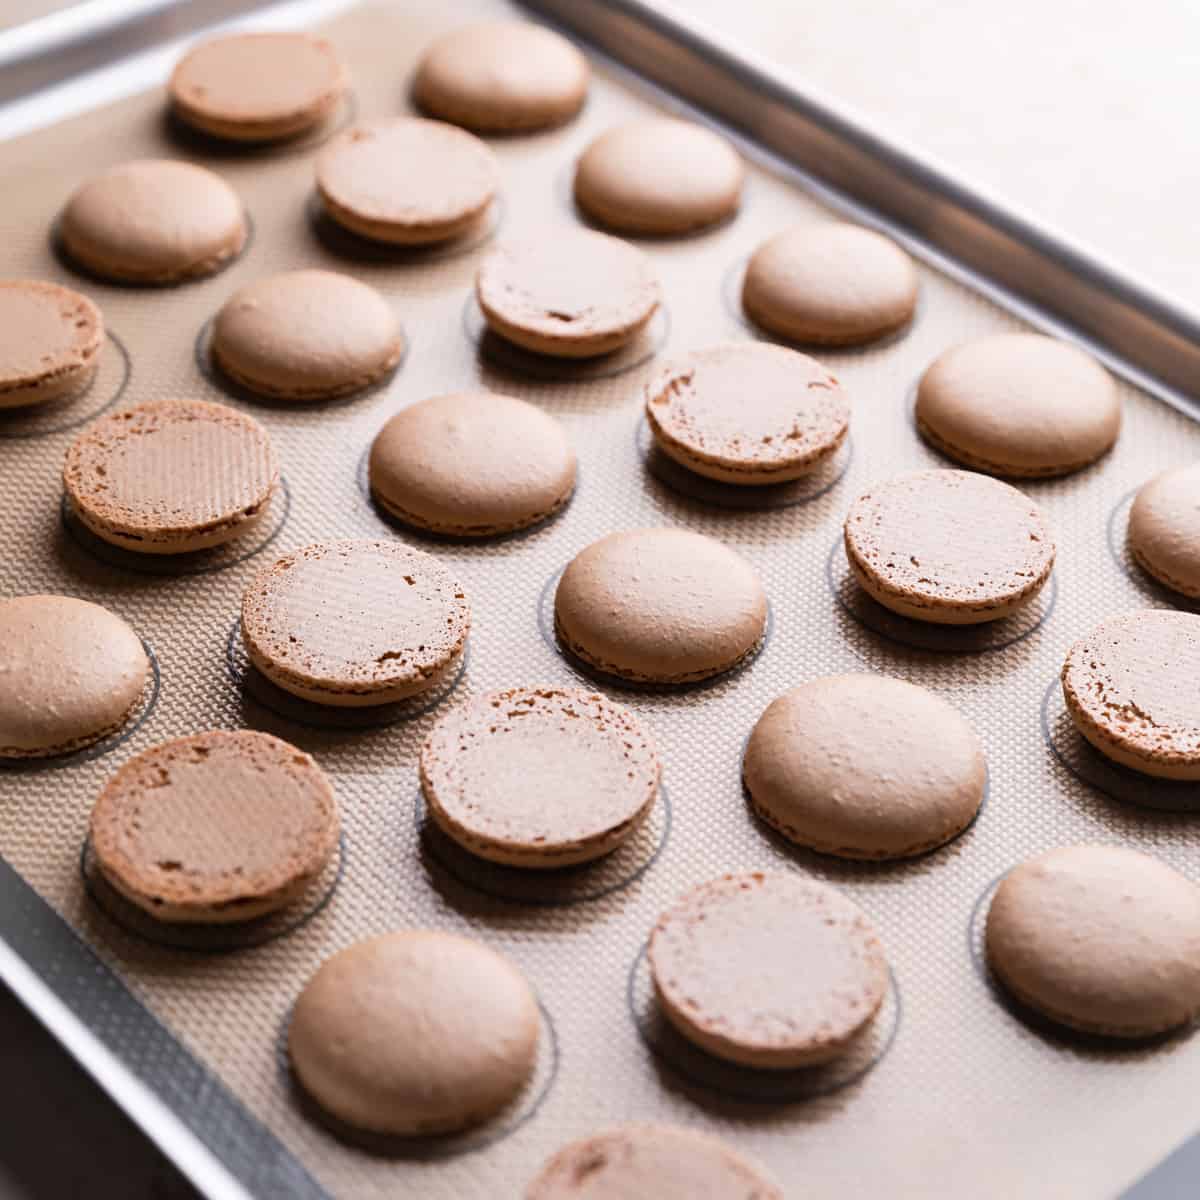 baked gingerbread macarons on a metal tray with half of them turned upside down.